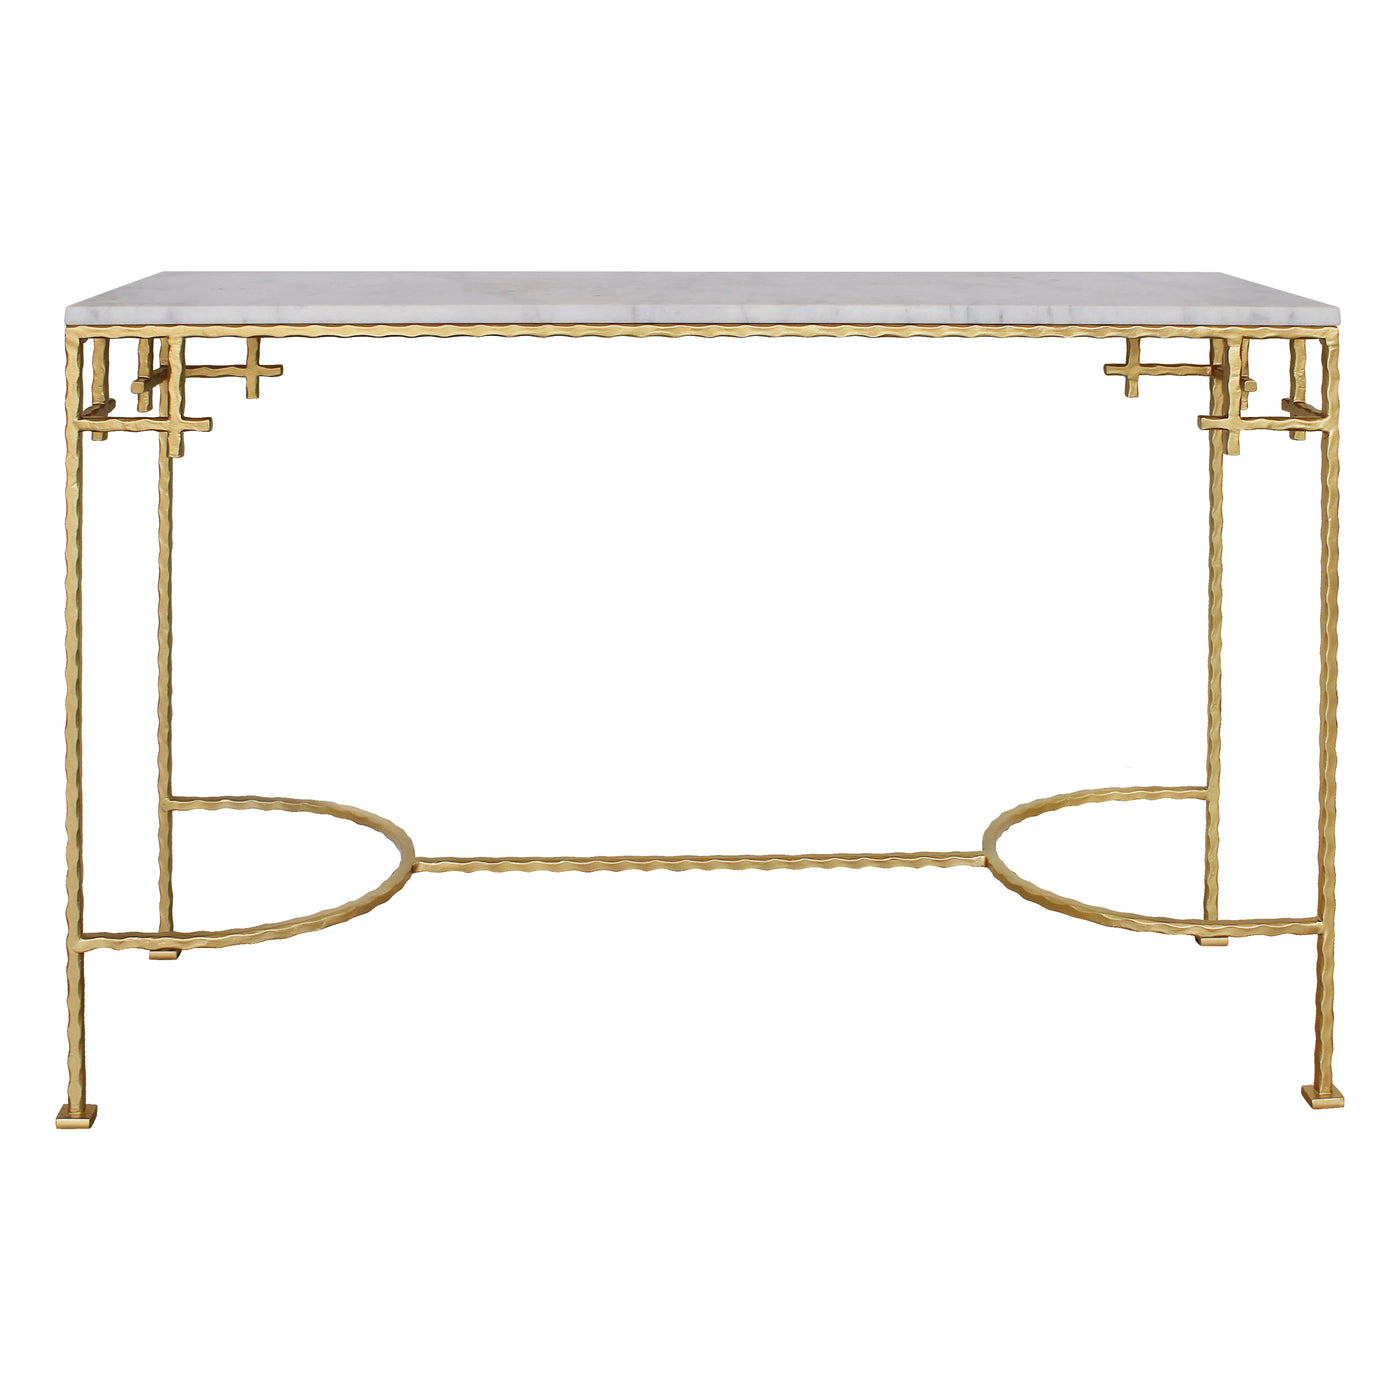 A modern rectangular wrought iron golden console table with a white marble top